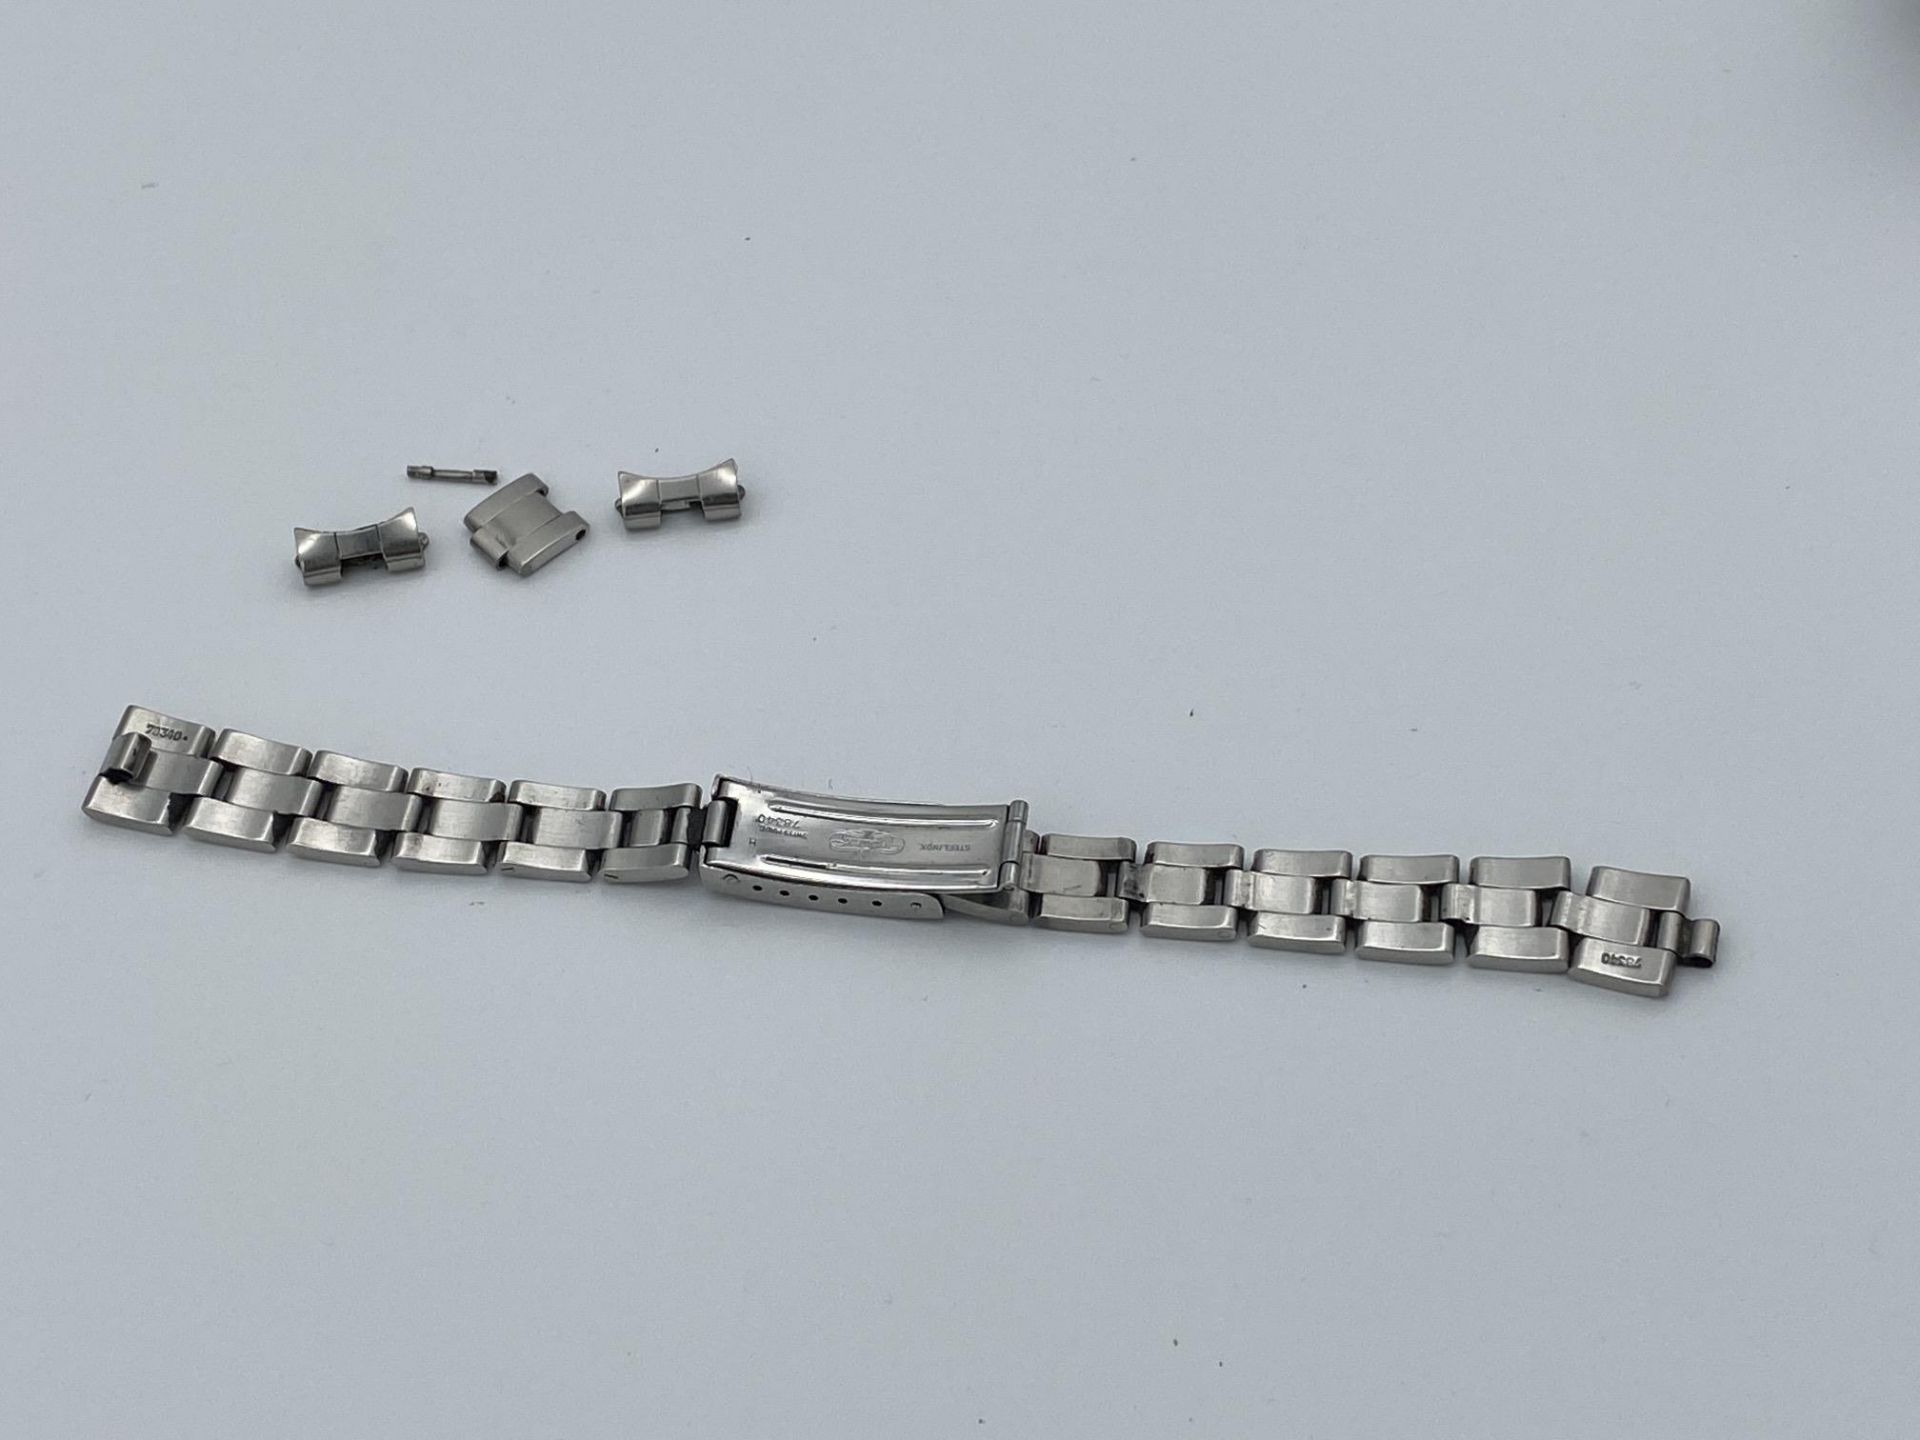 ROLEX STAINLESS STEEL WATCH STRAP - Image 7 of 7